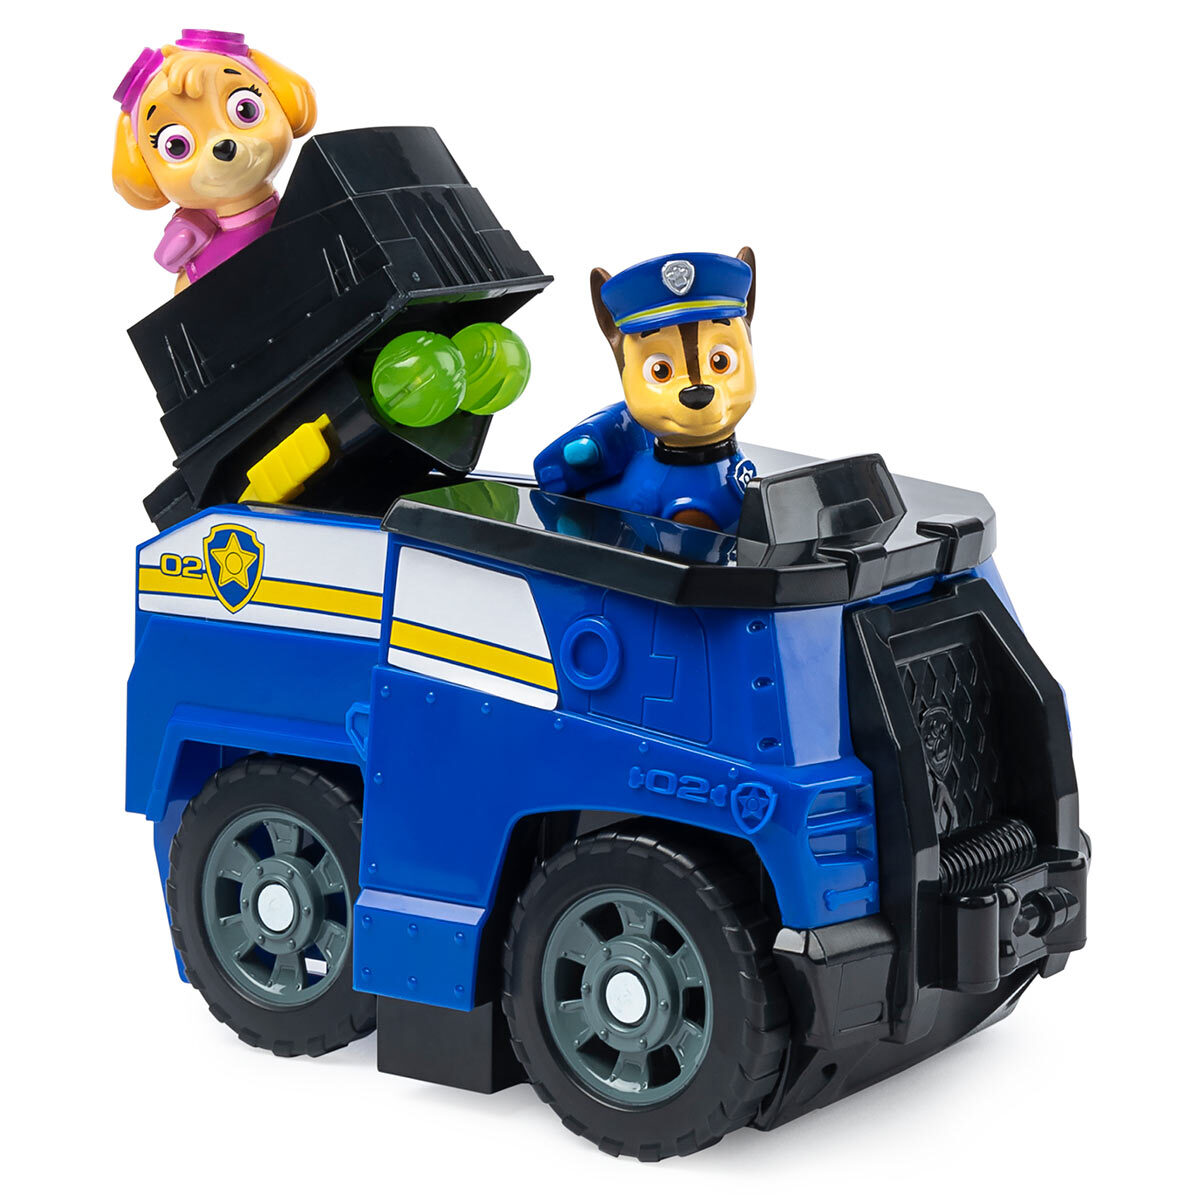 Paw Patrol Split-Second Vehicle With Chase and Skye Figures (3+ Years)